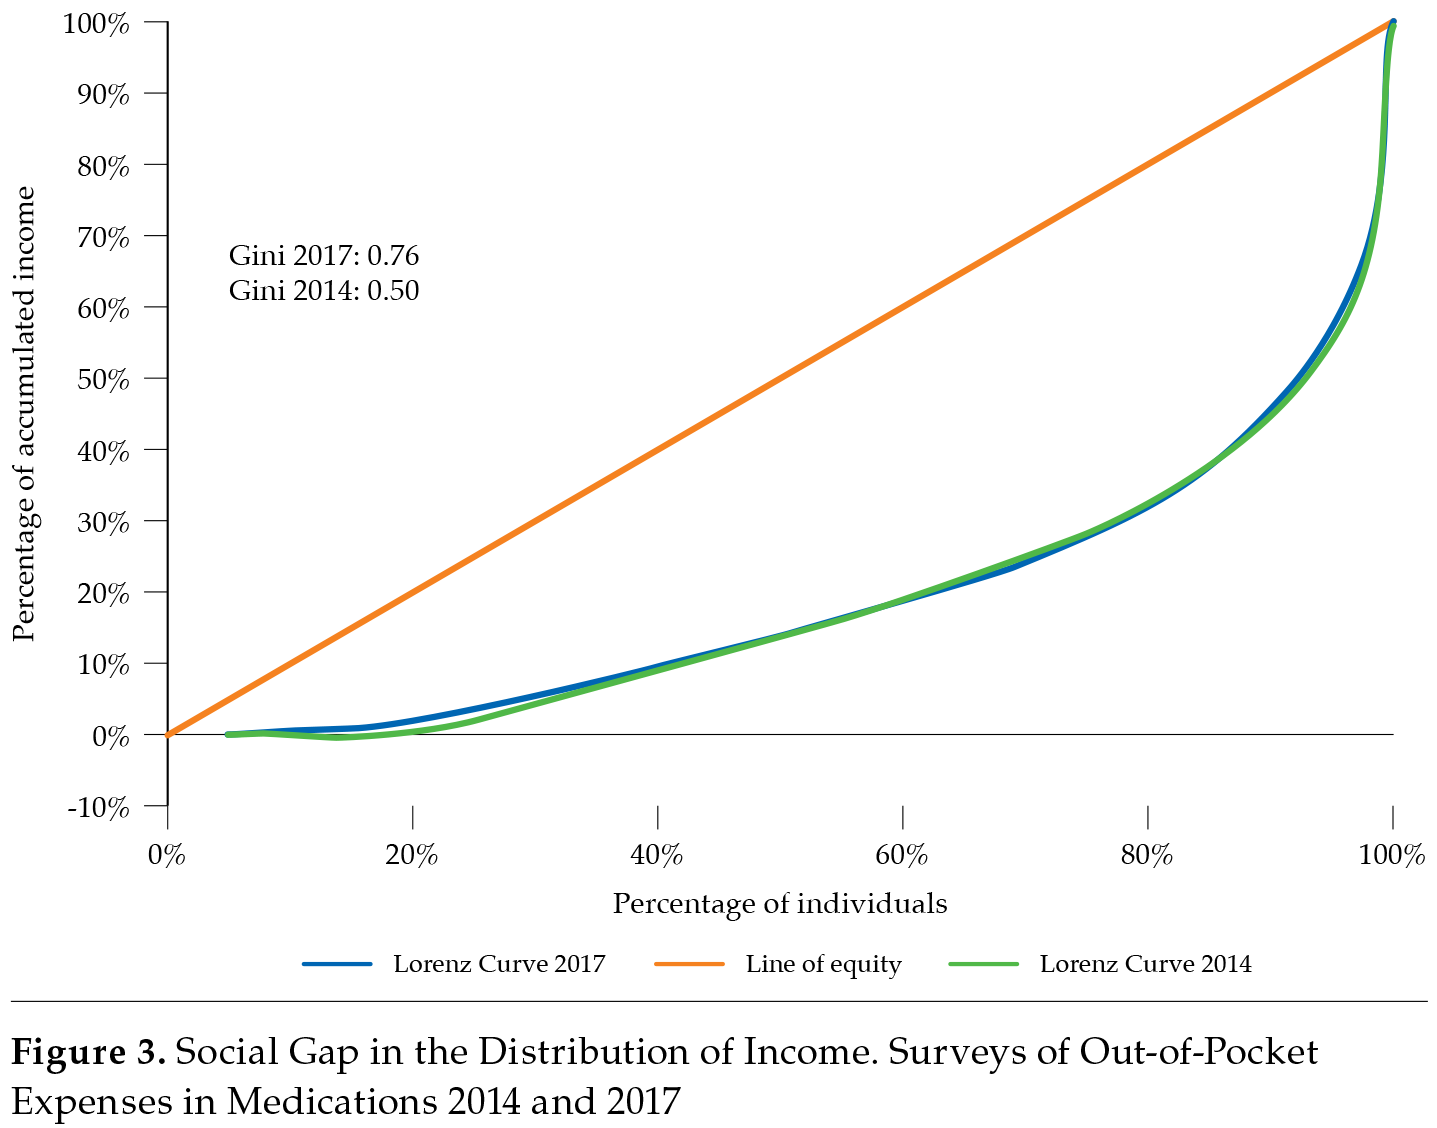 Social Gap in the Distribution of Income. Surveys of Out-of-Pocket Expenses in Medications 2014 and 2017